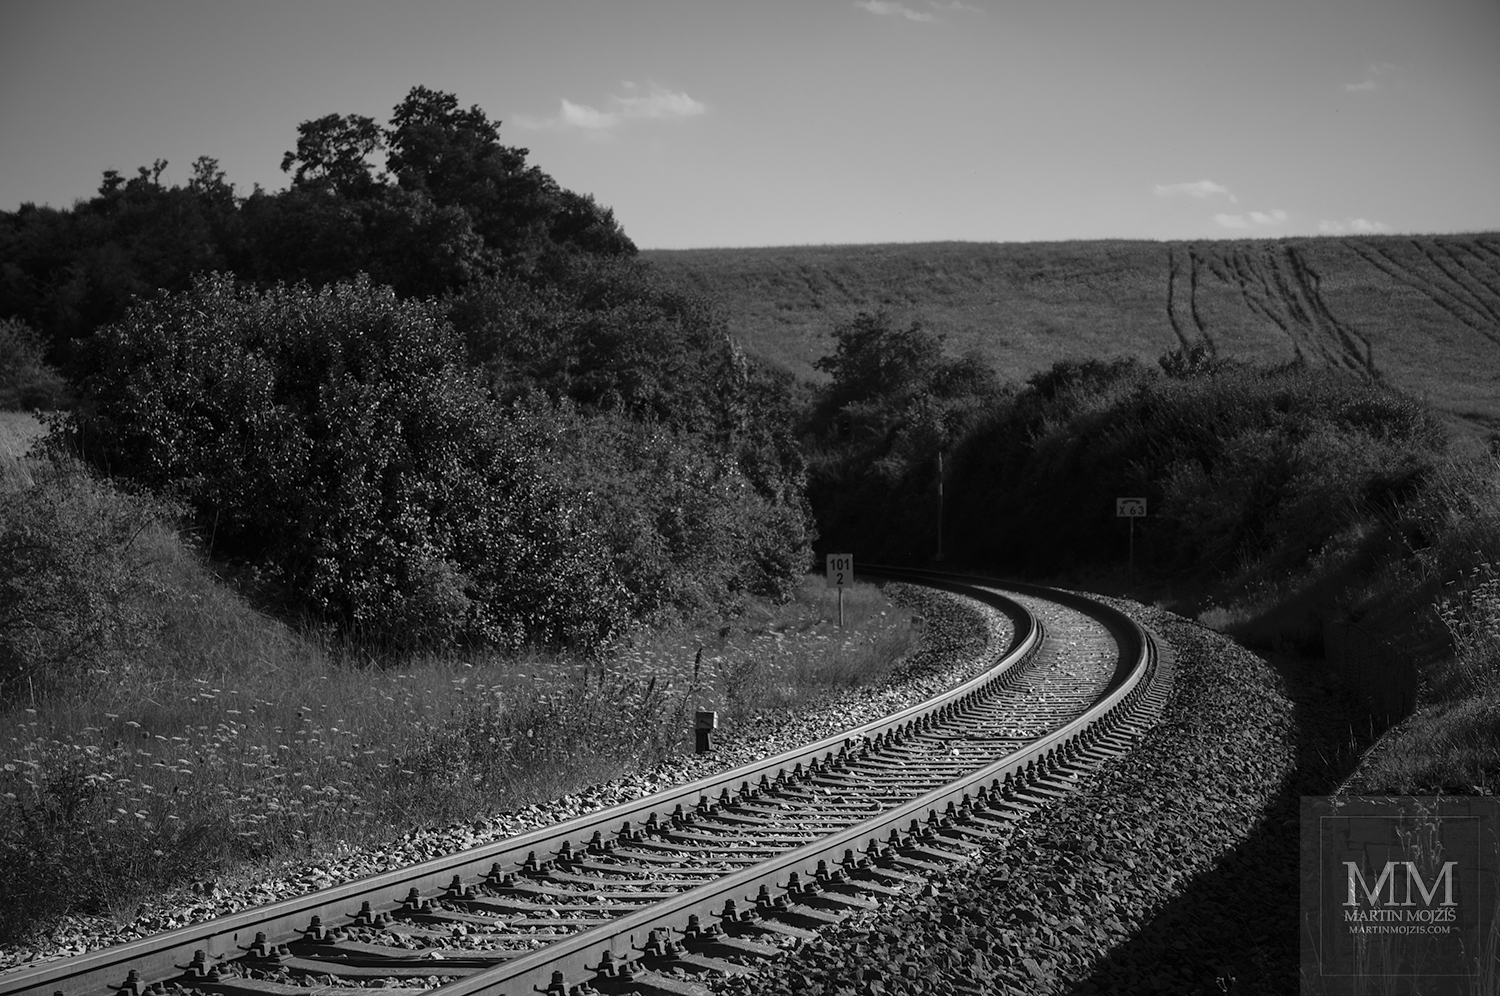 Railway track in an arc between fields. Black and white fine art photograph ARC AND FIELDS, photographed by Martin Mojzis.